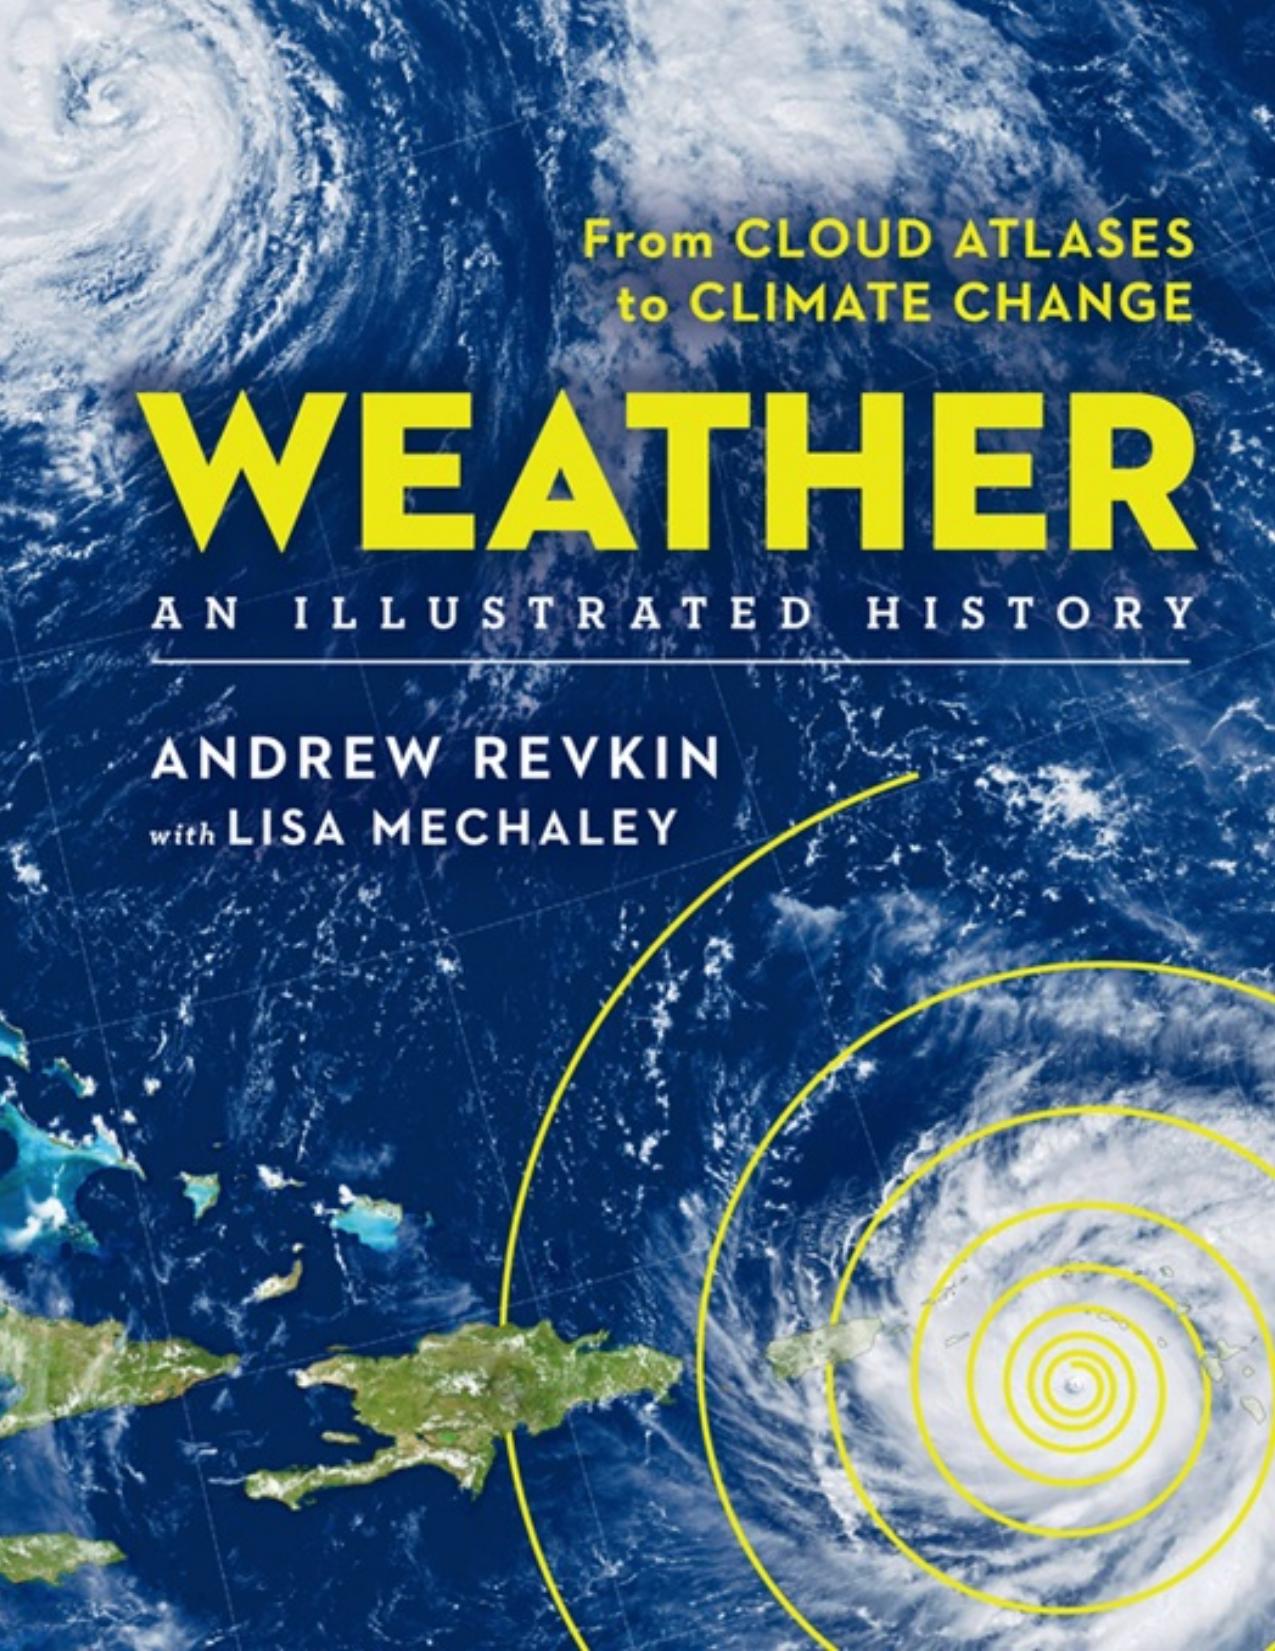 Weather: An Illustrated History: From Cloud Atlases to Climate Change - PDFDrive.com